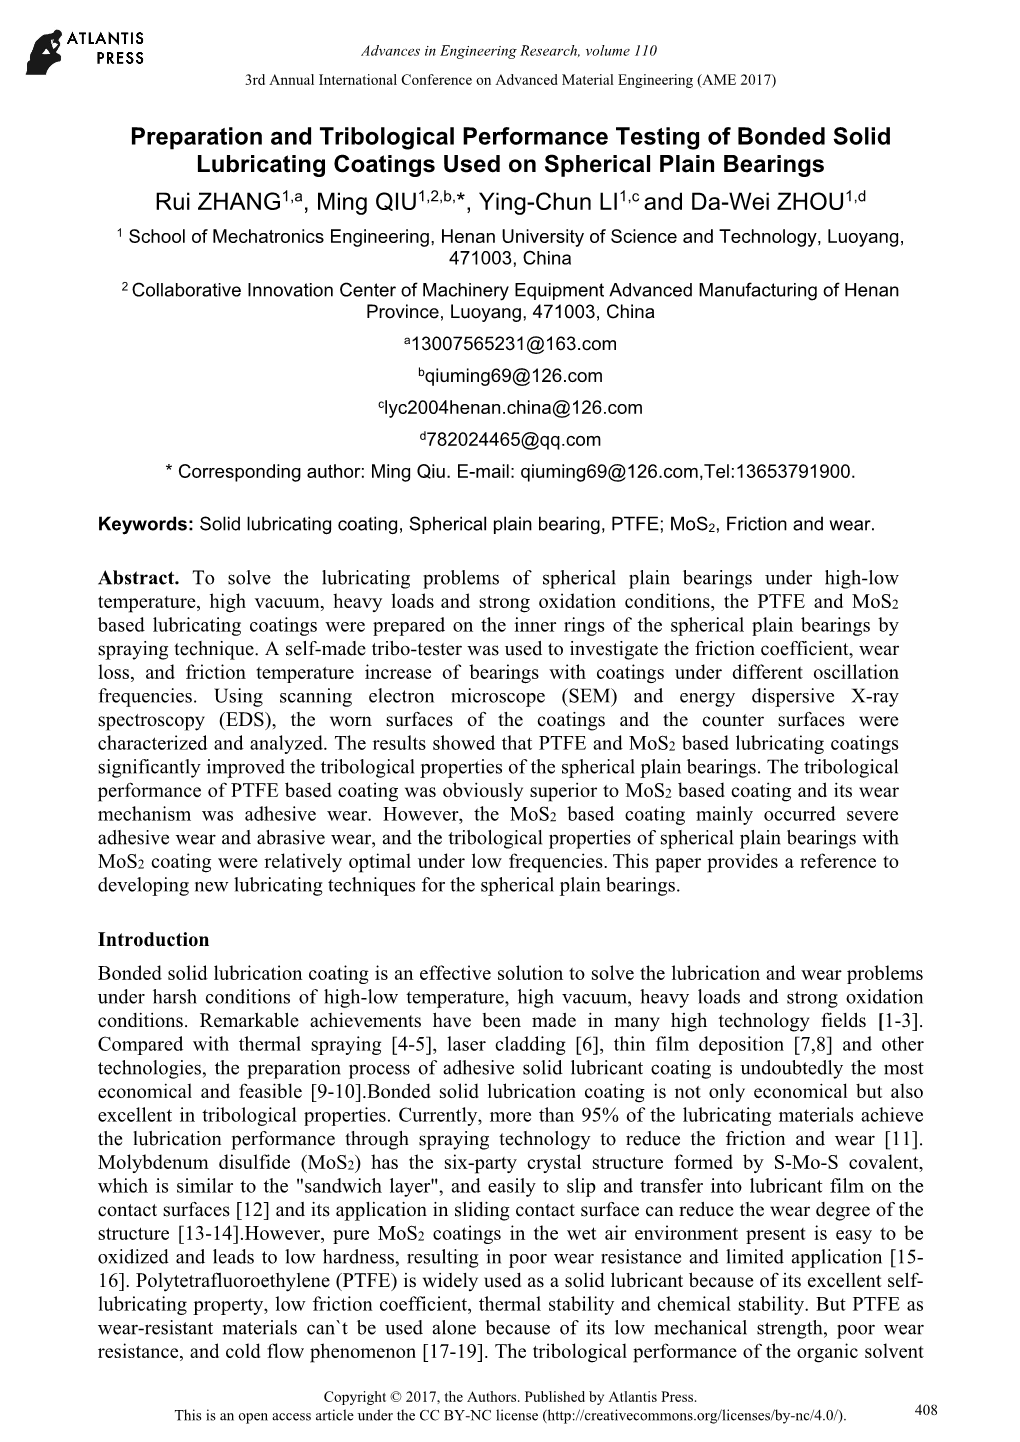 Preparation and Tribological Performance Testing of Bonded Solid Lubricating Coatings Used on Spherical Plain Bearings Rui ZHANG